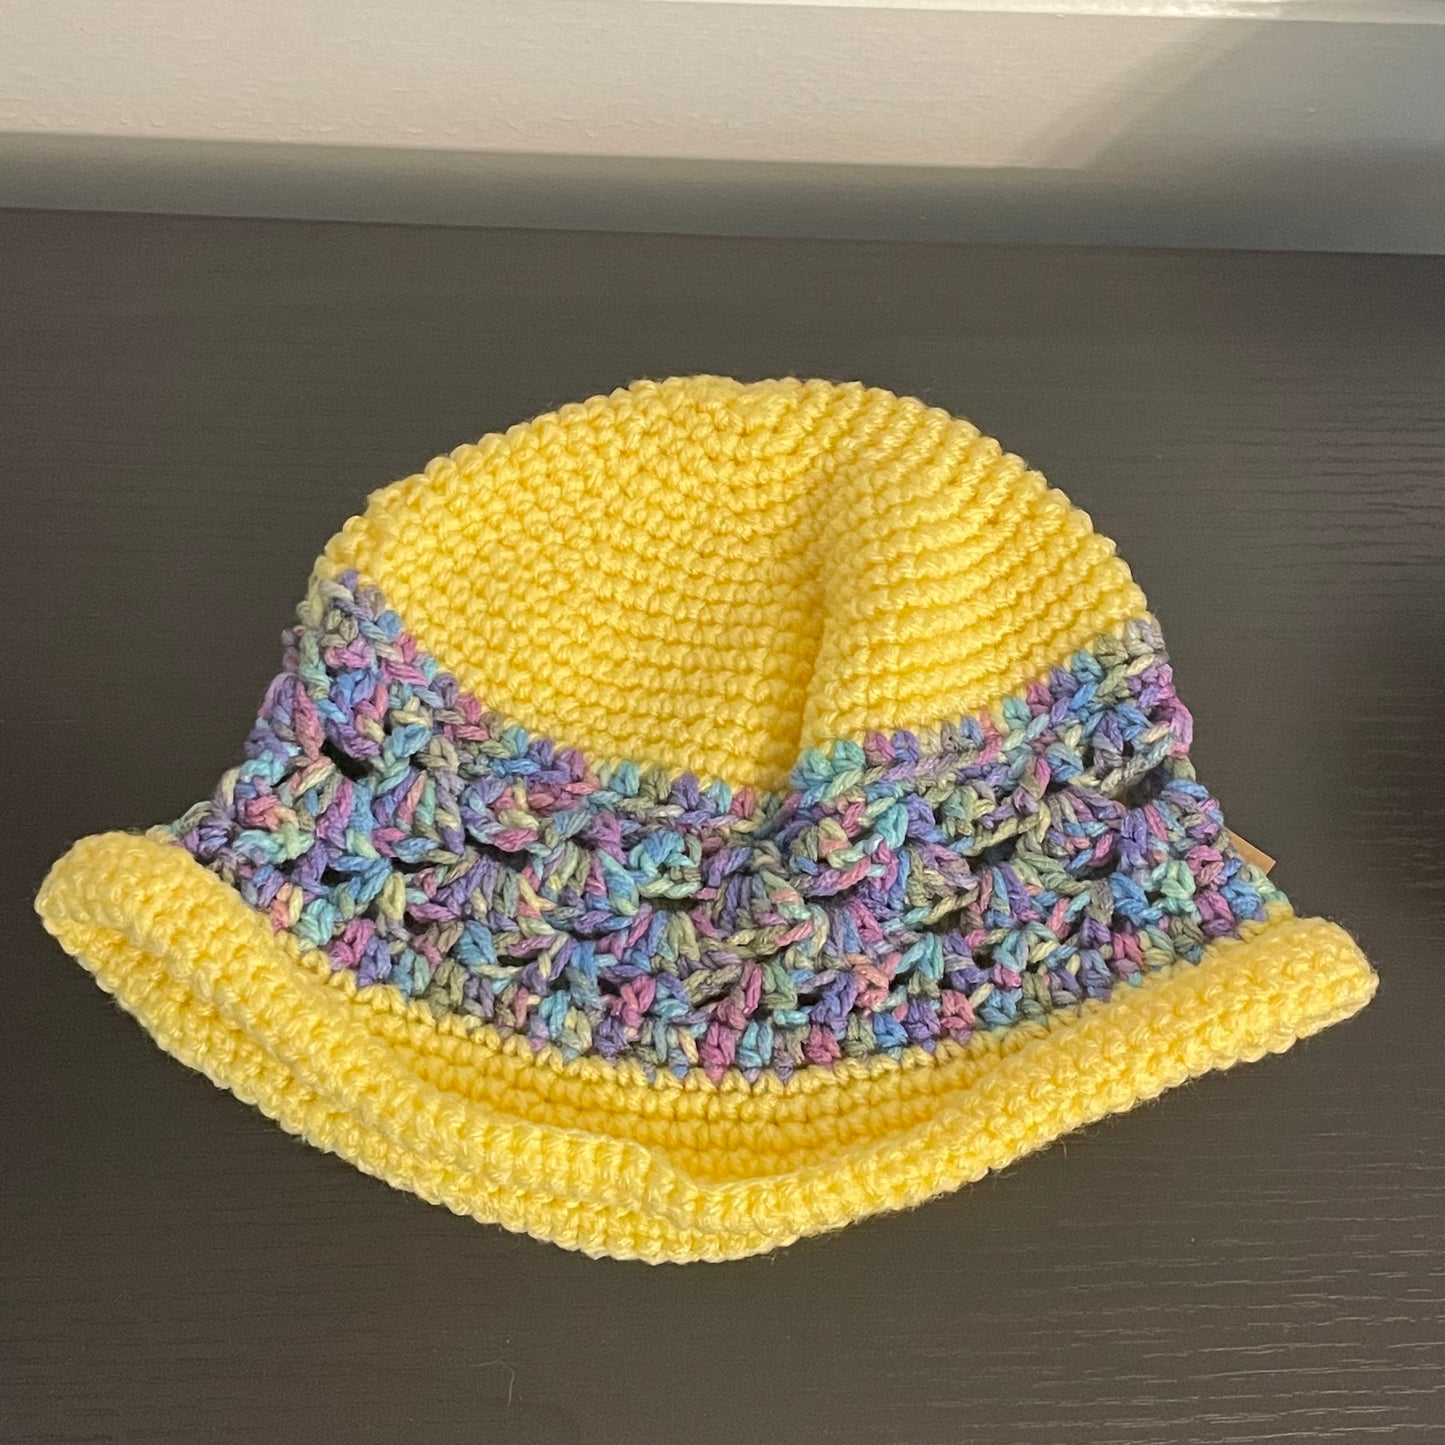 Rolled Brim Hat in Sunshine Yellow Hand Crafted Knit Unisex Vintage Retro Style Outdoor Crocheted Blue Purple Marble Accent